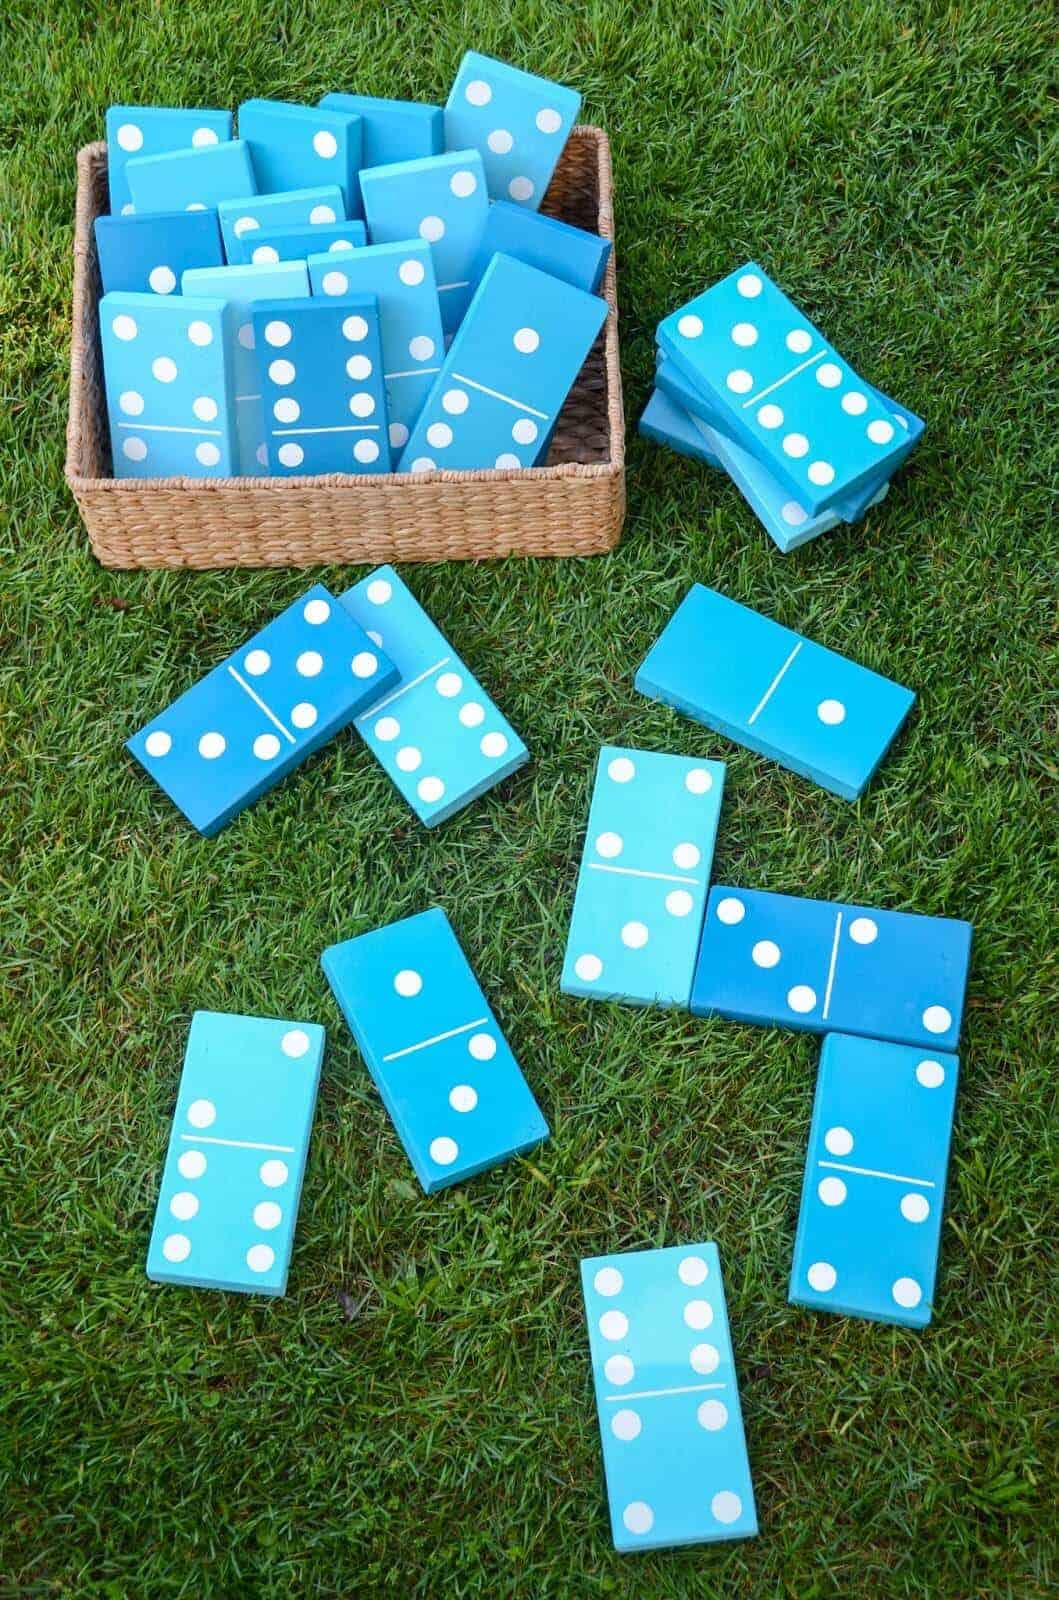 DIY Lawn Dominoes by Iron and Twine 